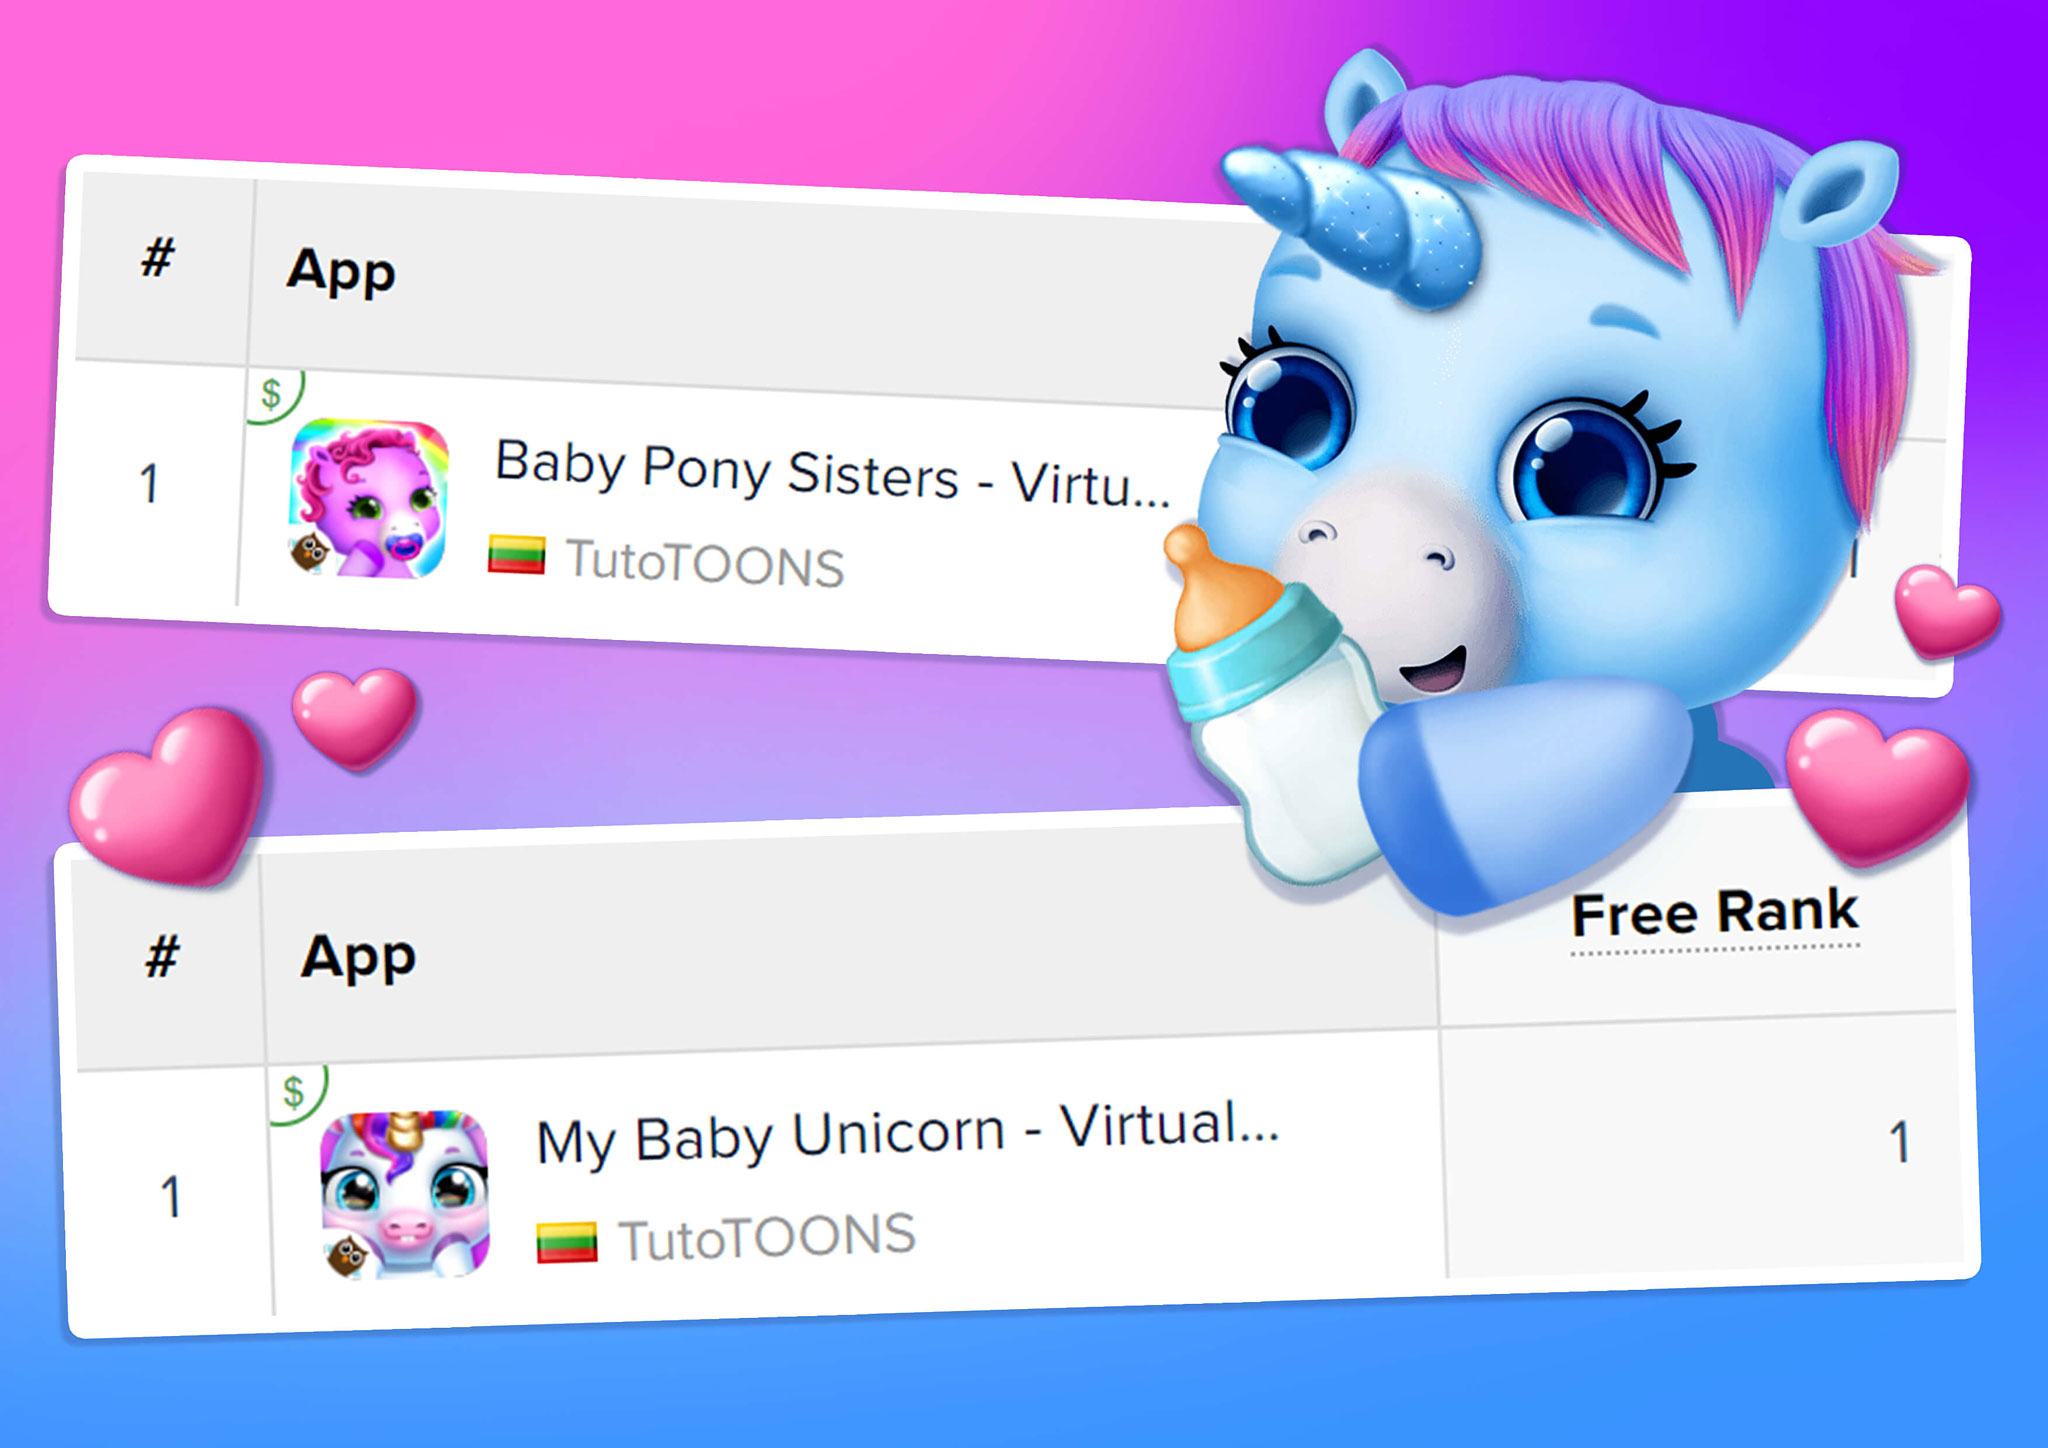 My Baby Care - Apps on Google Play